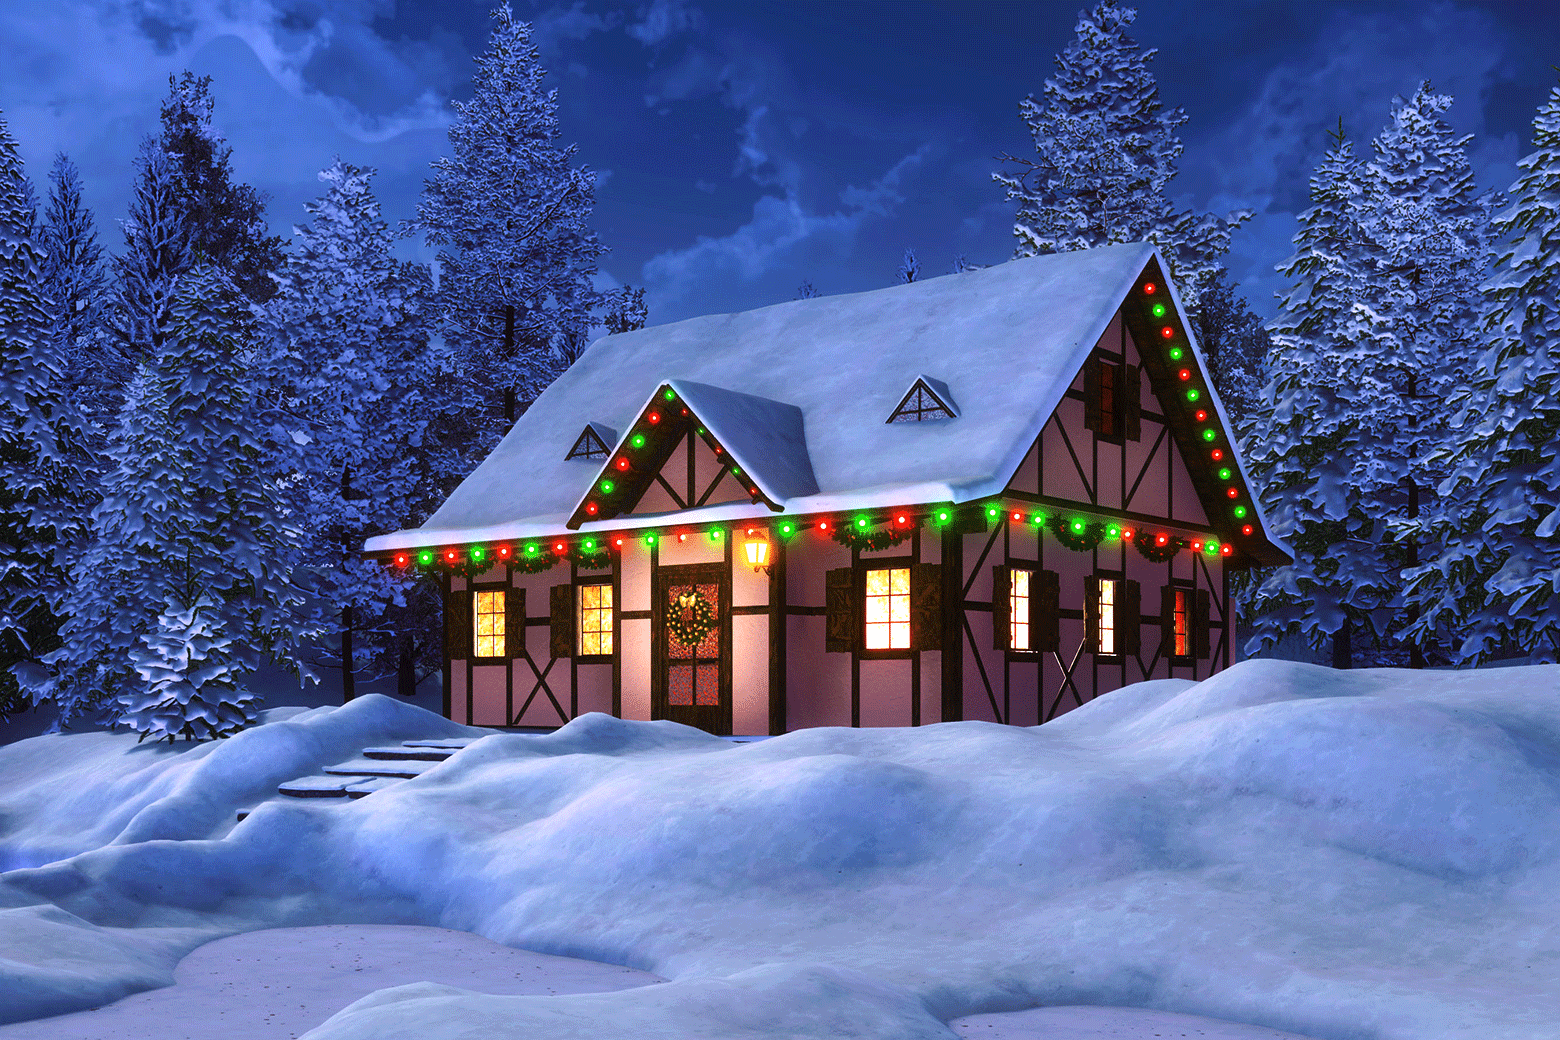 A snow-covered home in the woods with Christmas lights flickering out. Sad!